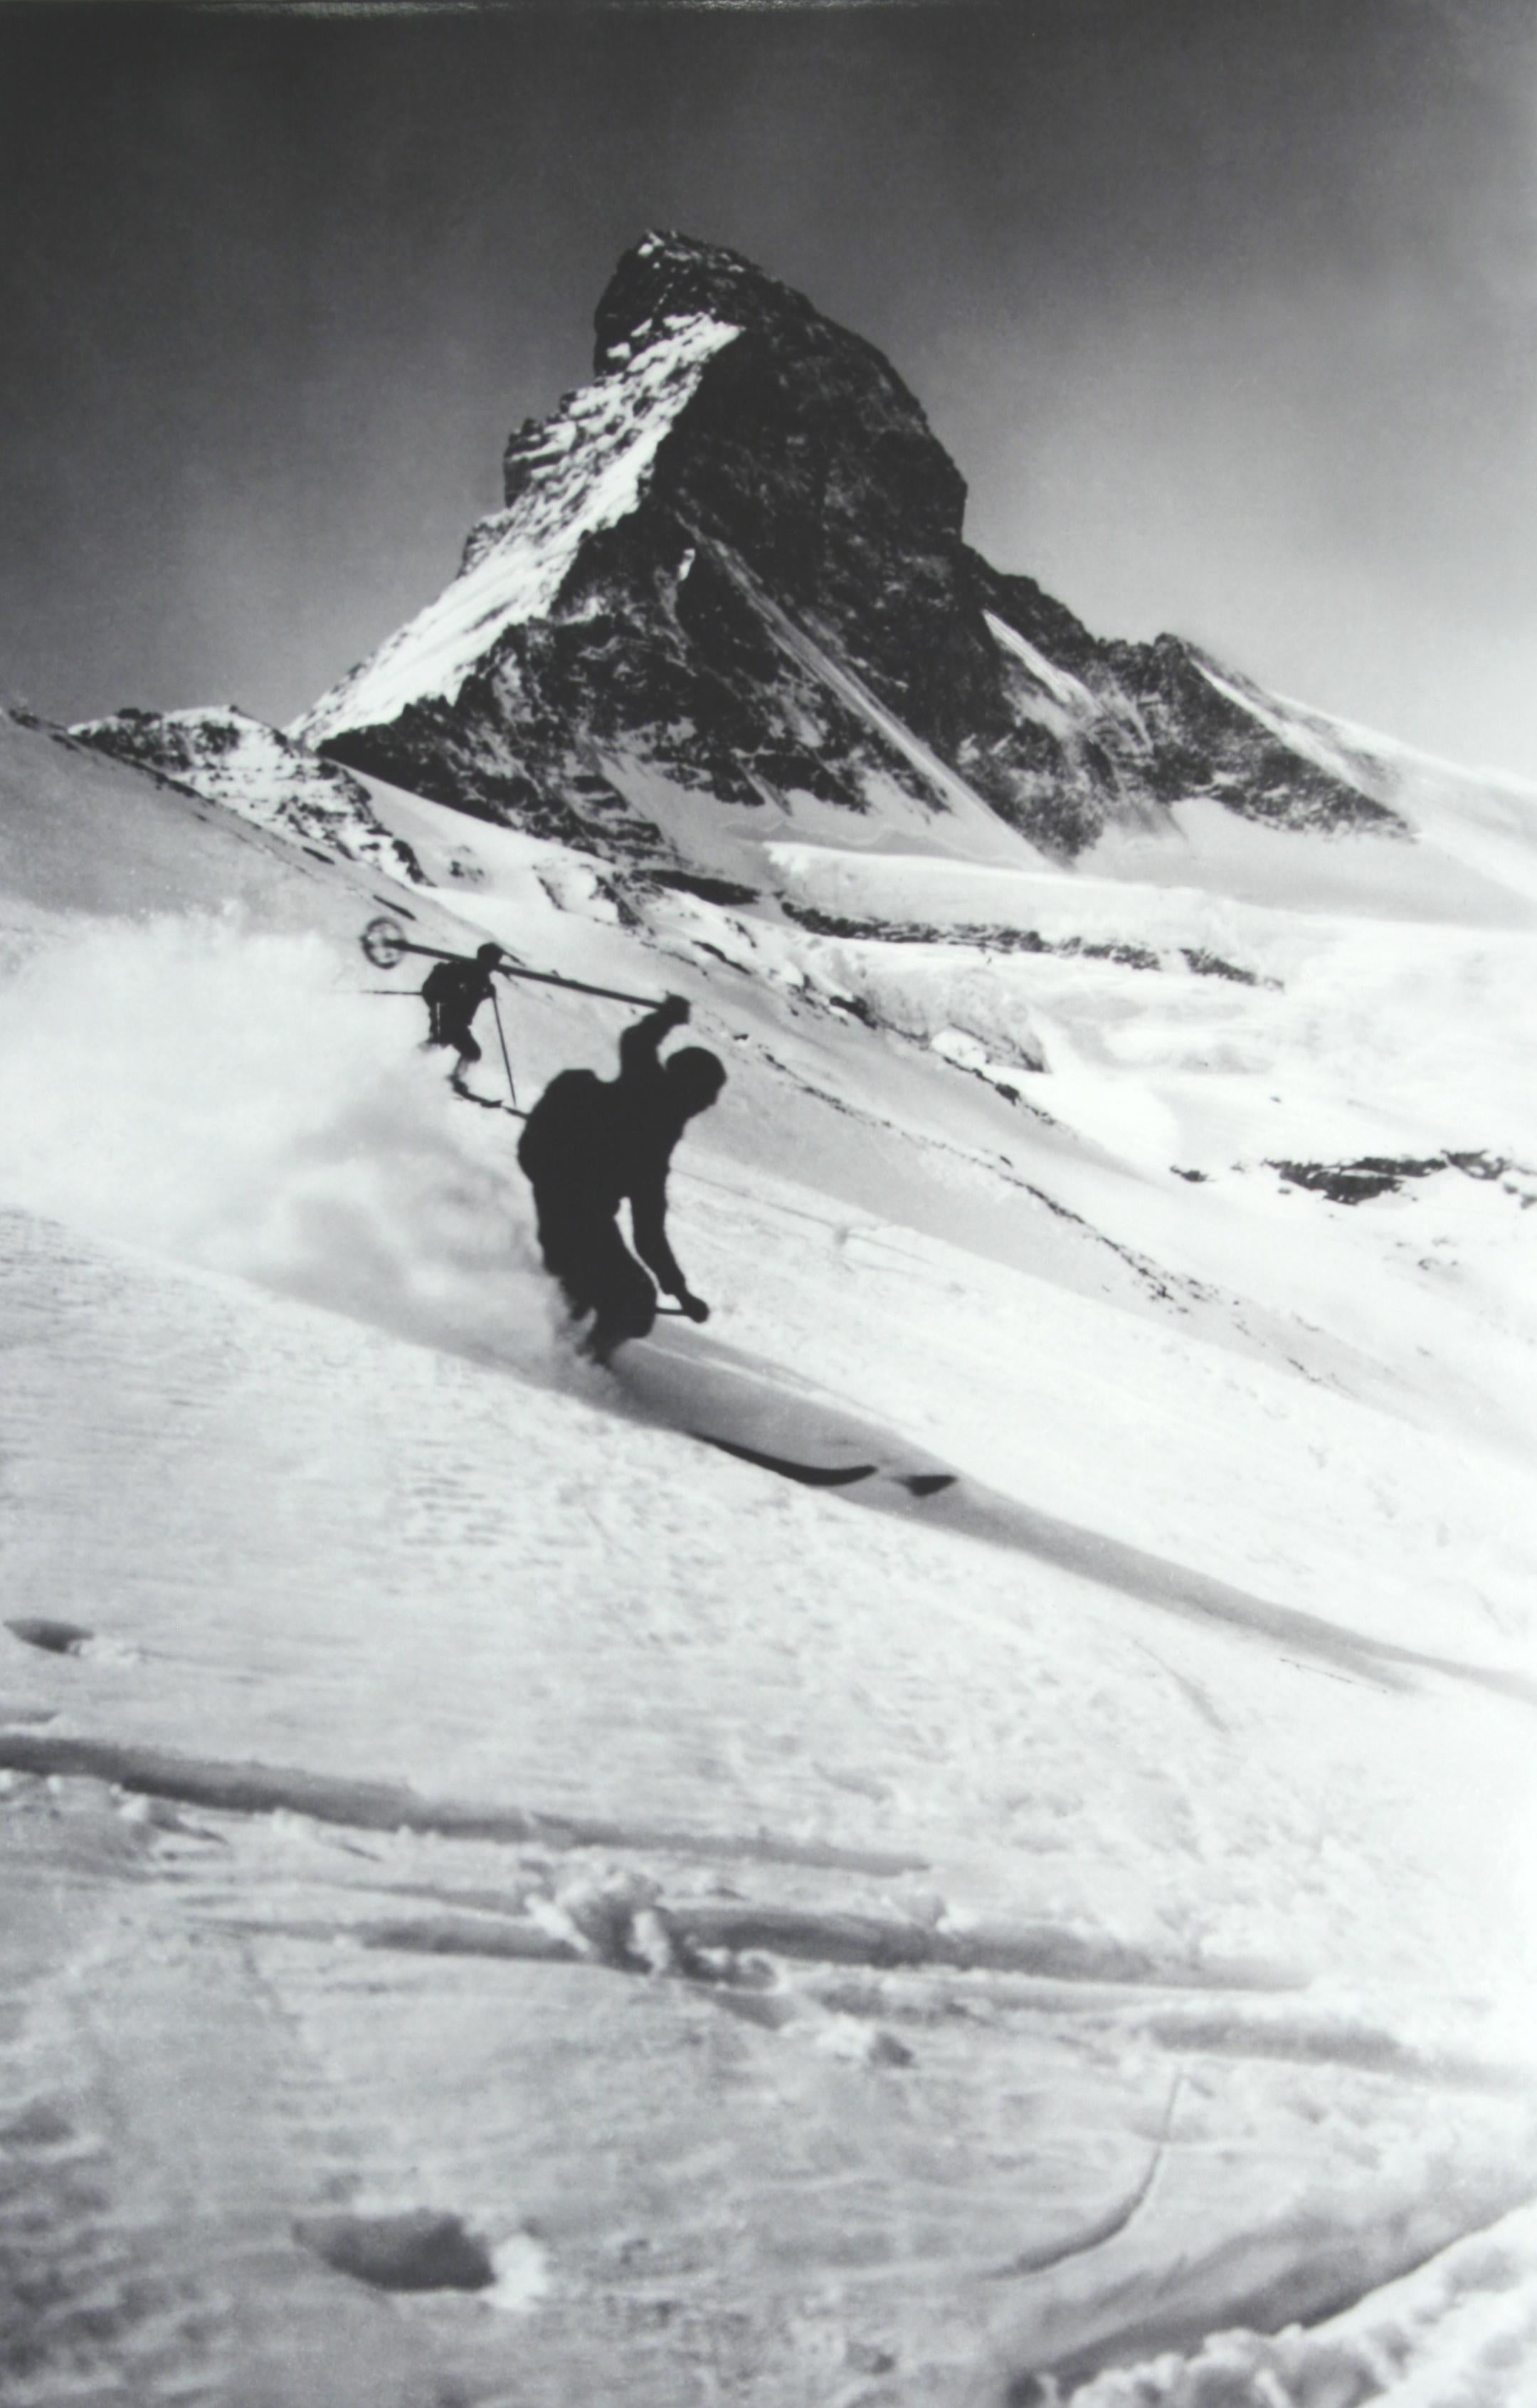 Vintage, antique alpine ski photograph.
'Matterhorn & Skiers', a new mounted black and white photographic image after an original 1930s skiing photograph. Black abd white alpine photos are the perfect addition to any home or ski lodge, so please do